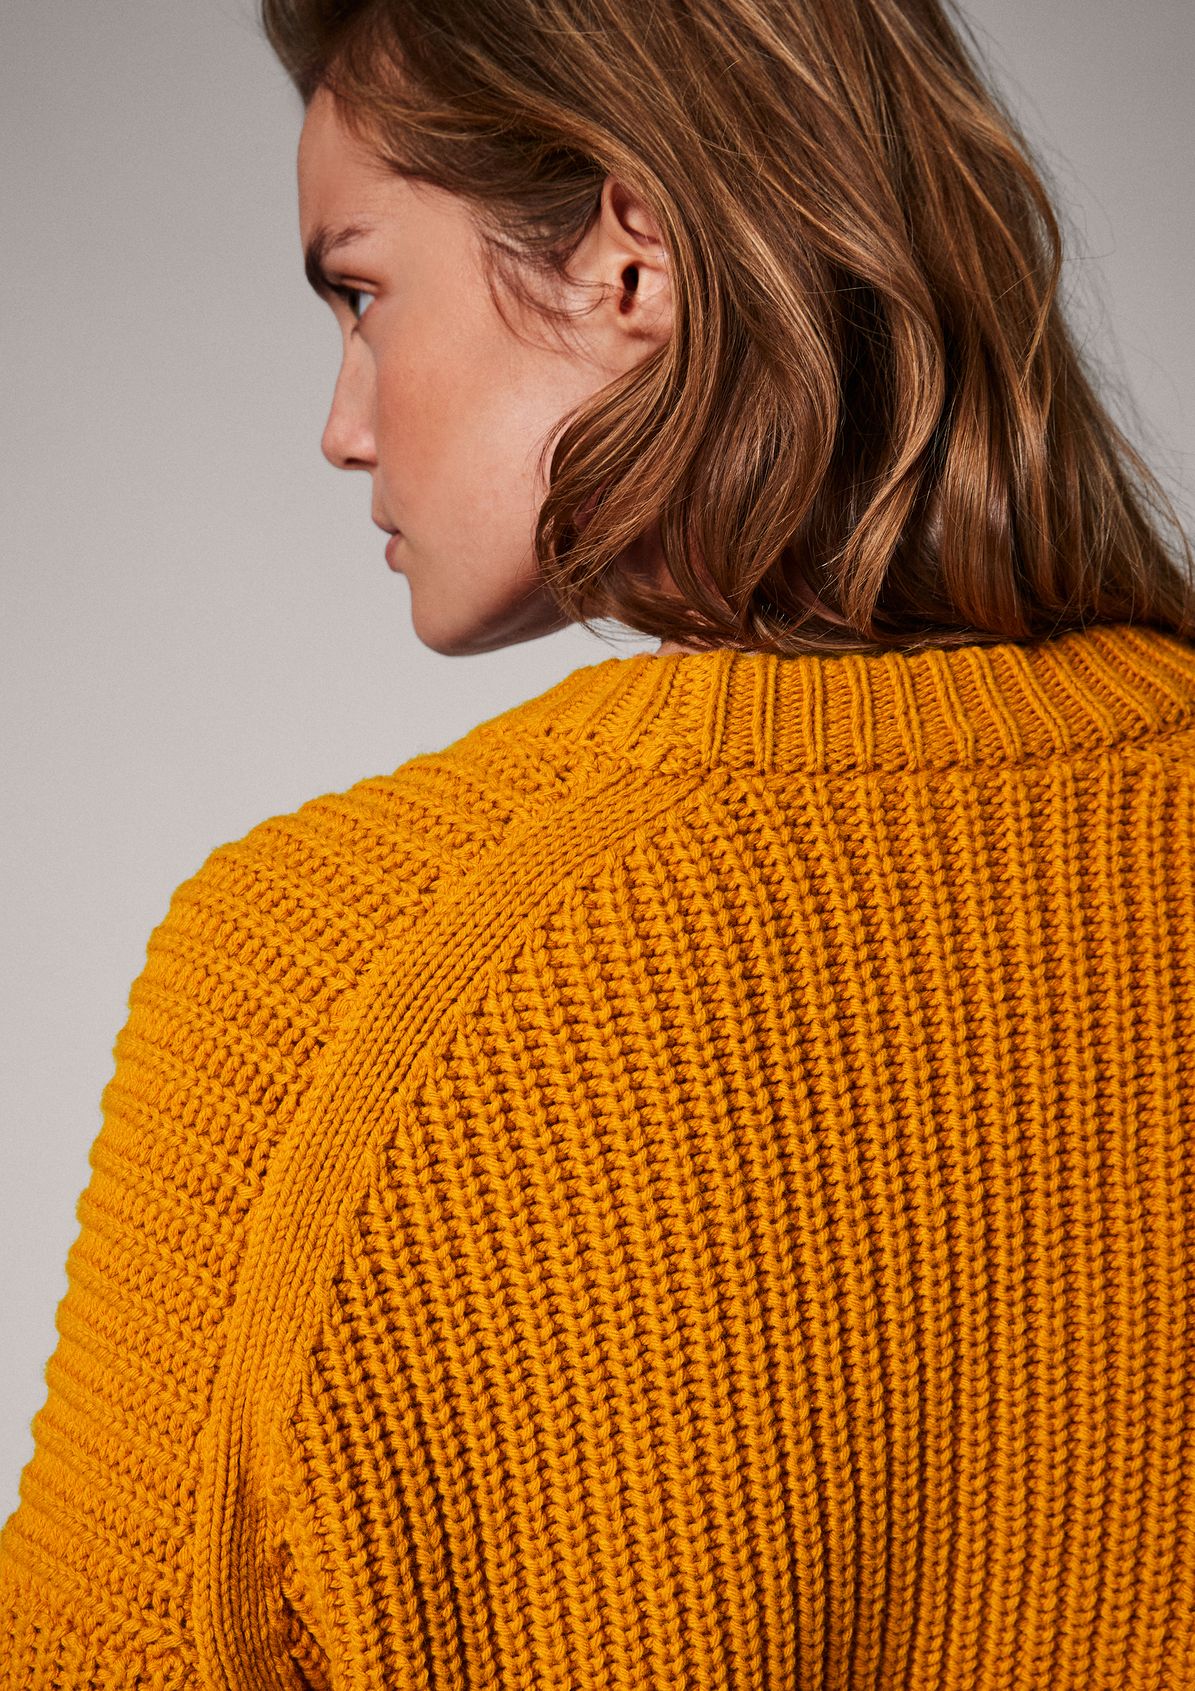 Knit jumper with a percentage of wool from comma